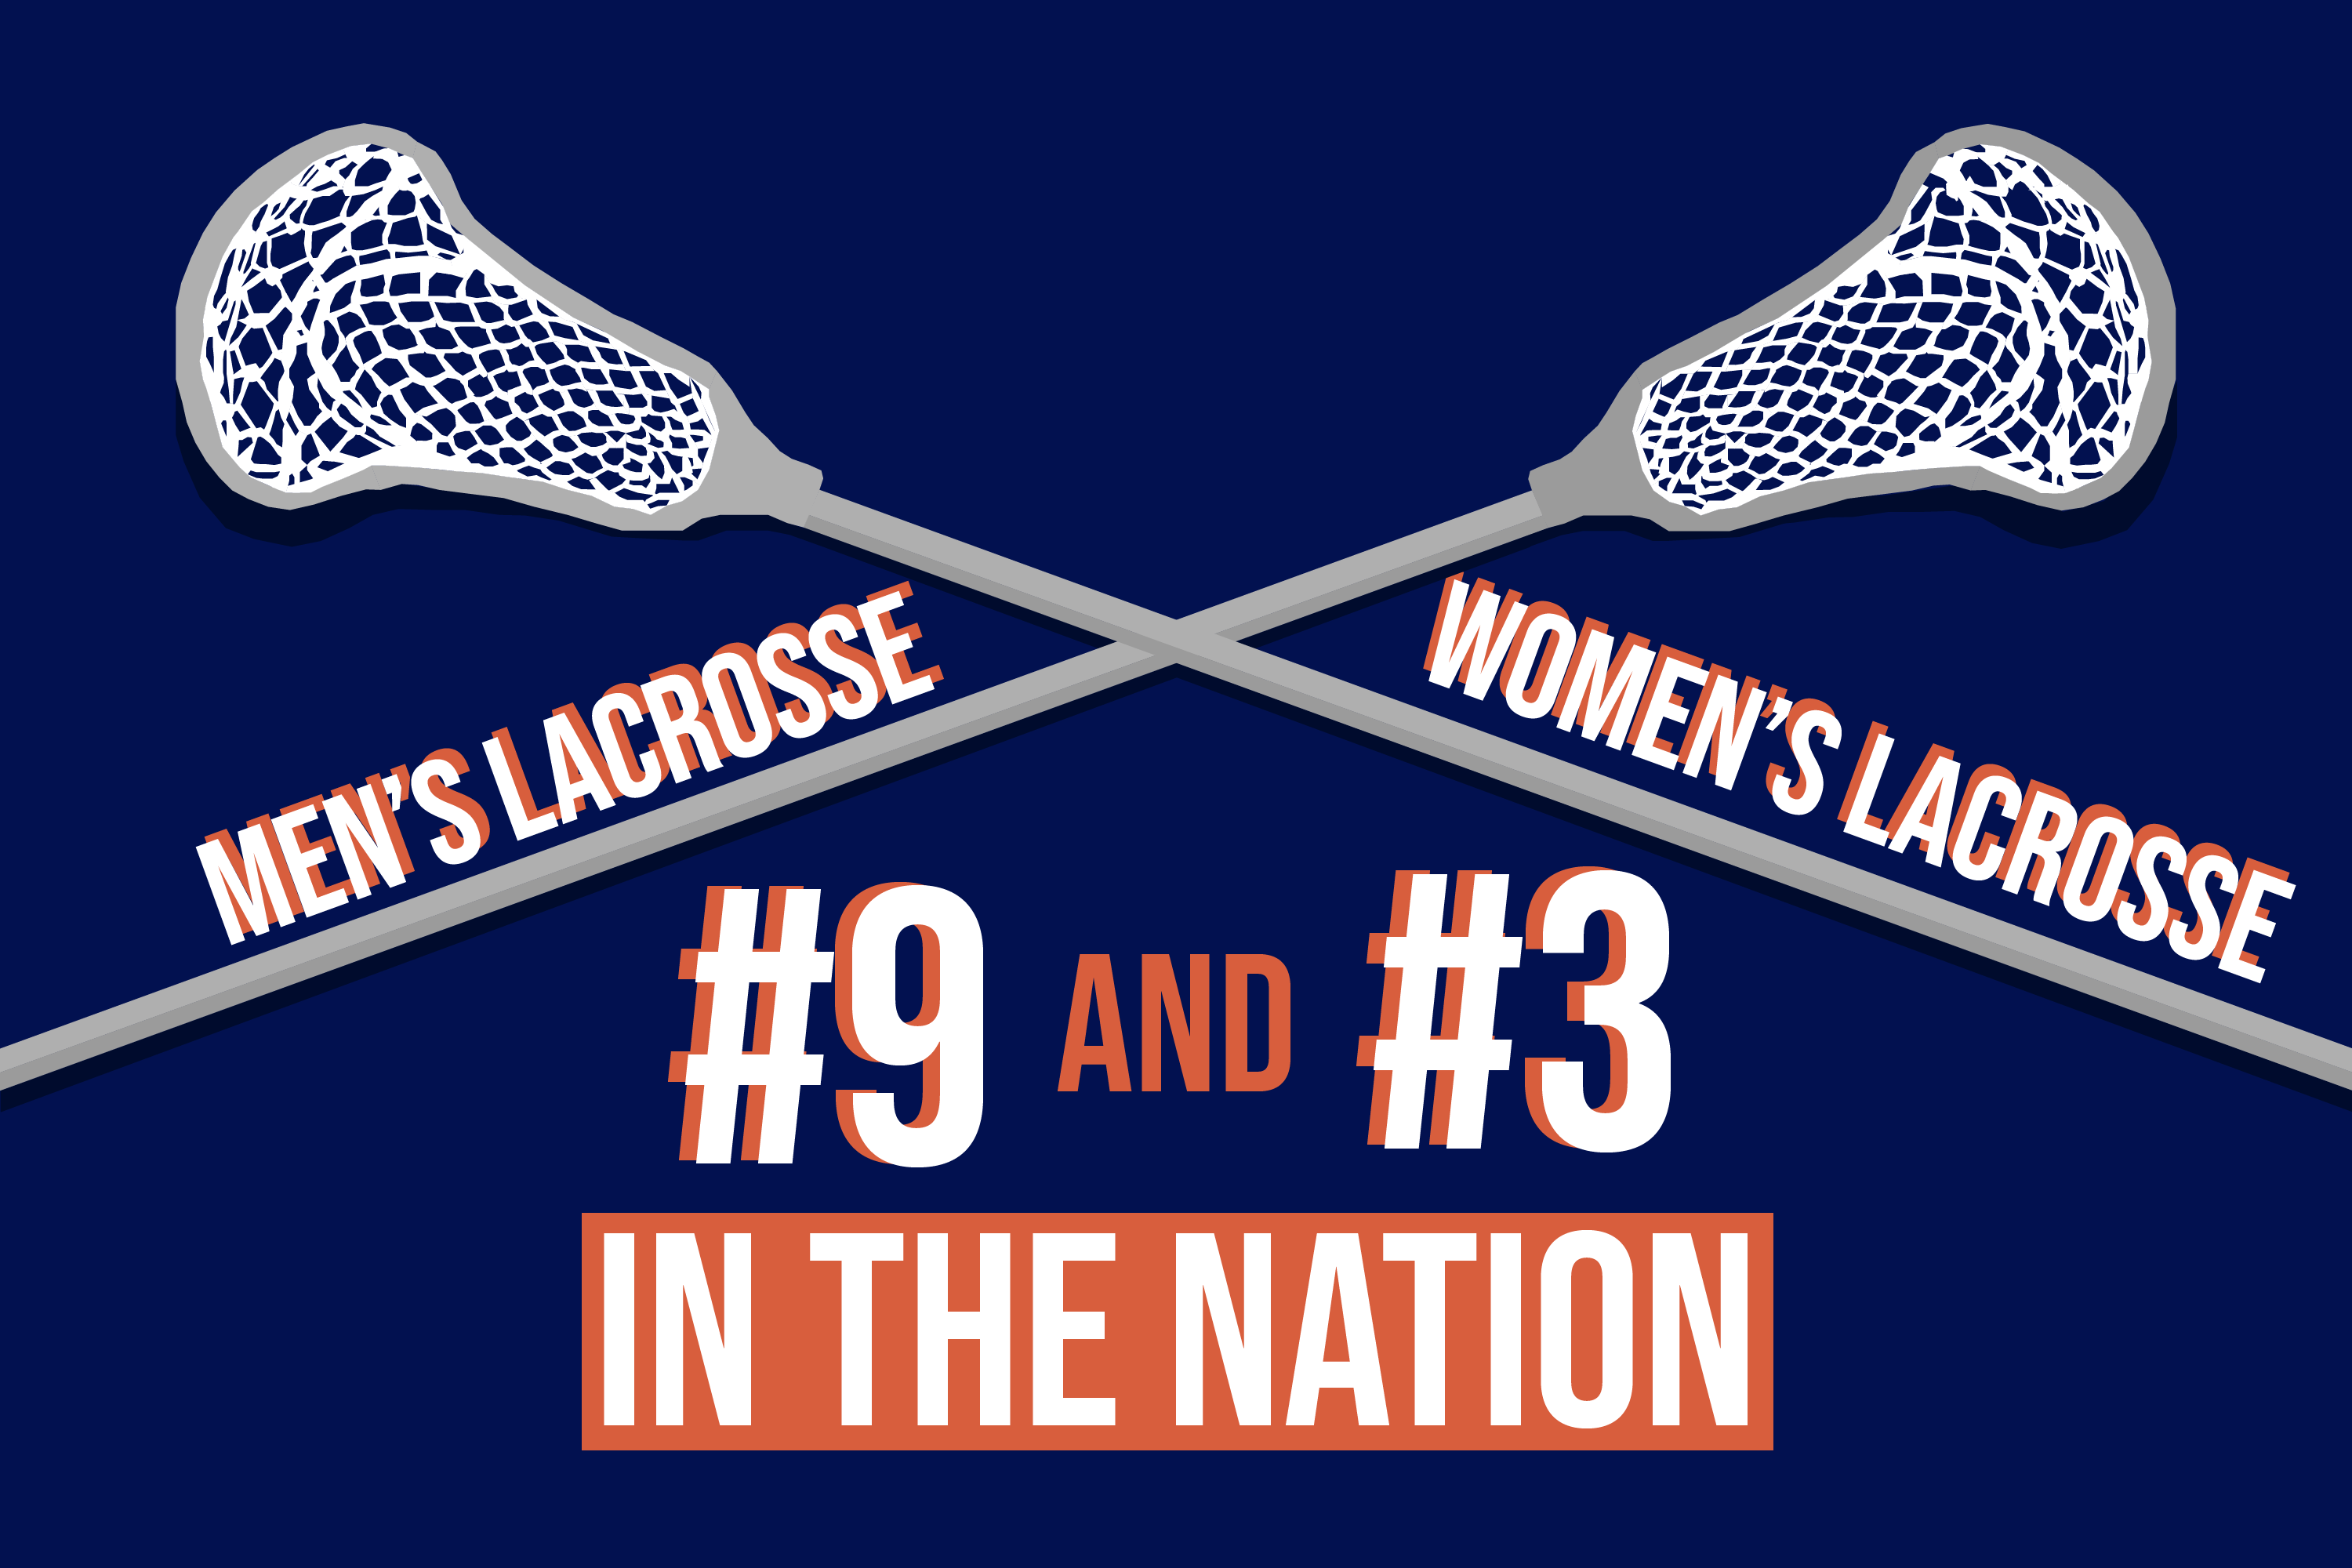 Graphic: SU men's lacrosse ranked #9 and women's lacrosse #3 nationally